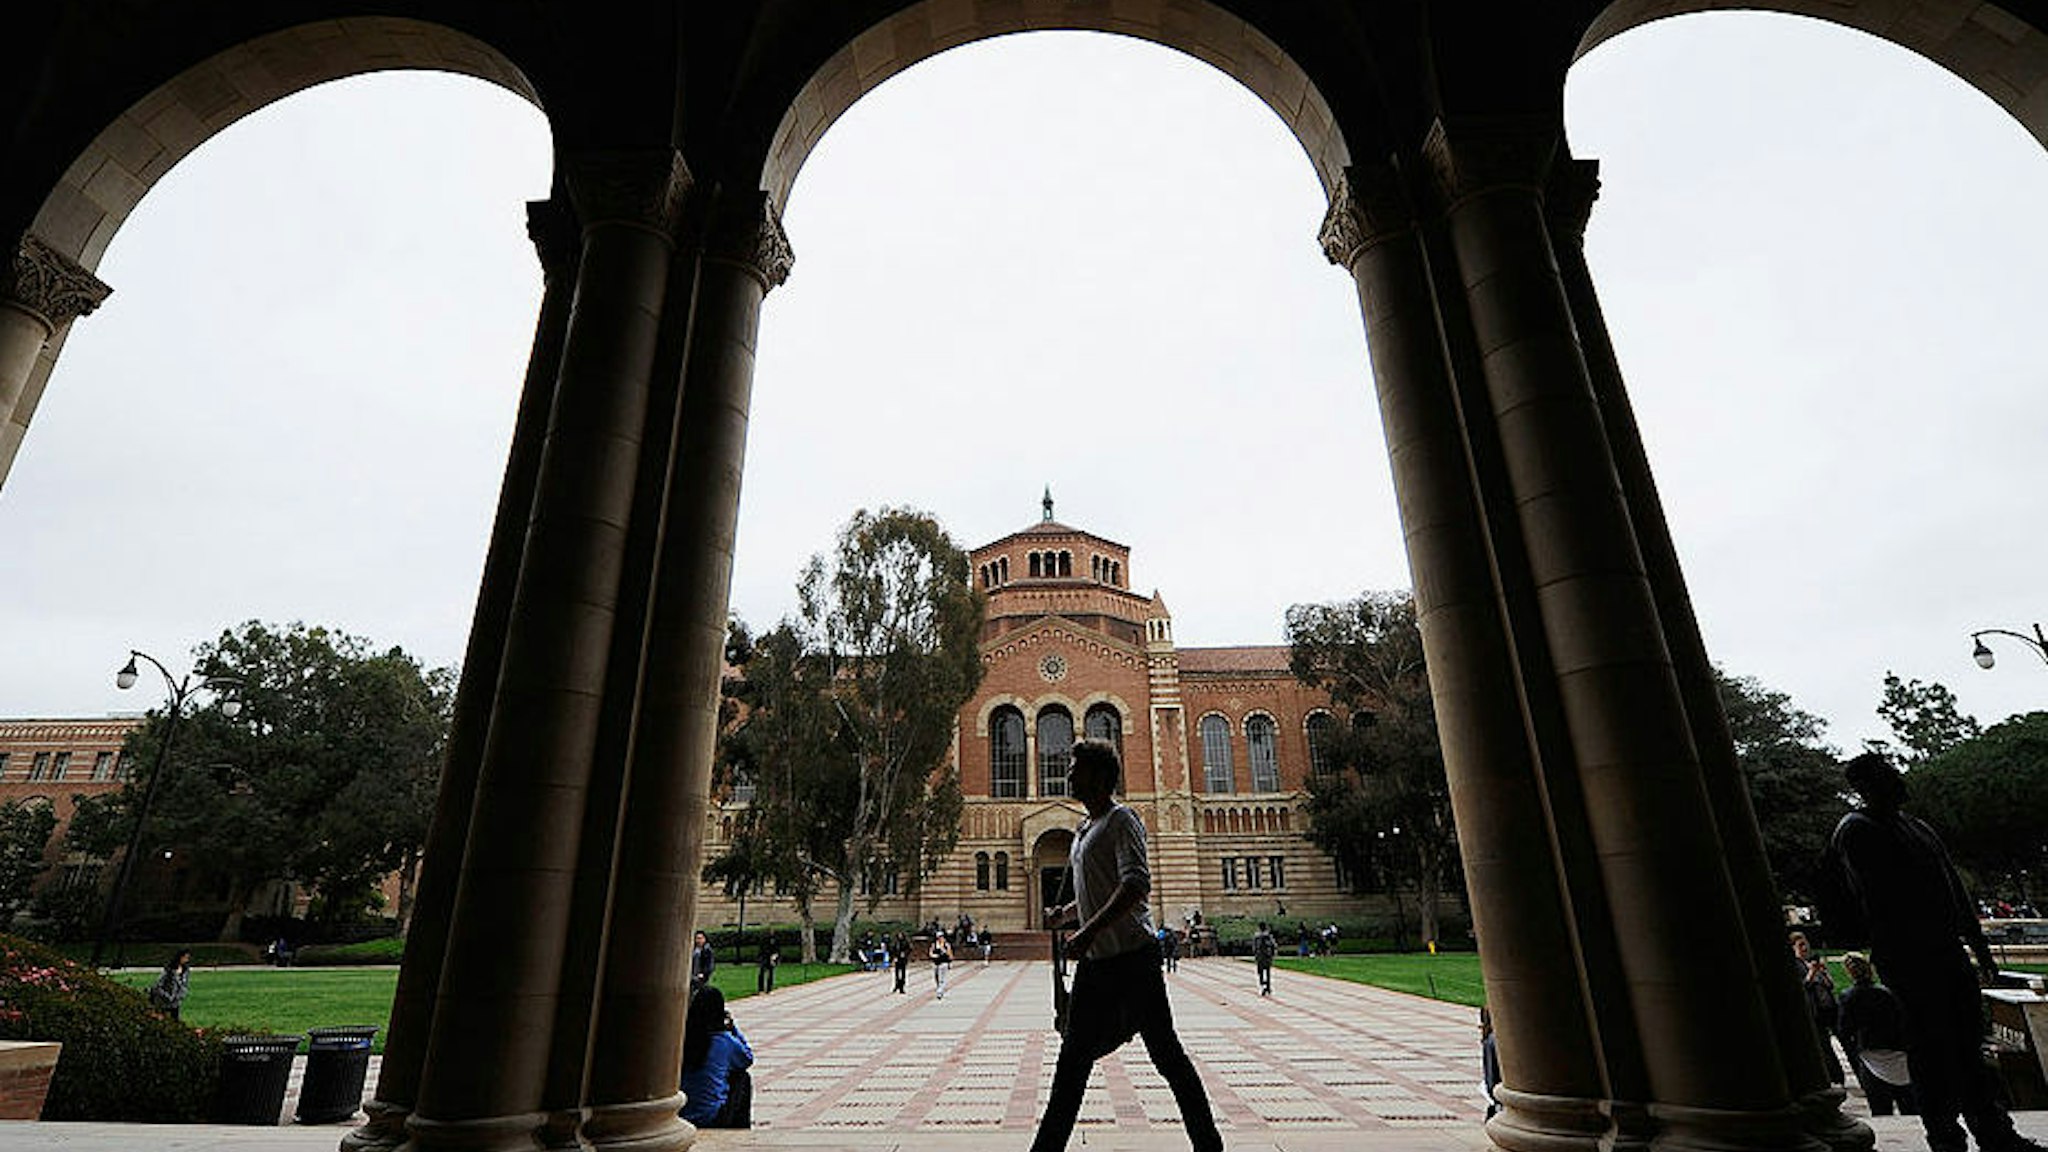 LOS ANGELES, CA - APRIL 23: A student walks near Royce Hall on the campus of UCLA on April 23, 2012 in Los Angeles, California. According to reports, half of recent college graduates with bachelor's degrees are finding themselves underemployed or jobless.